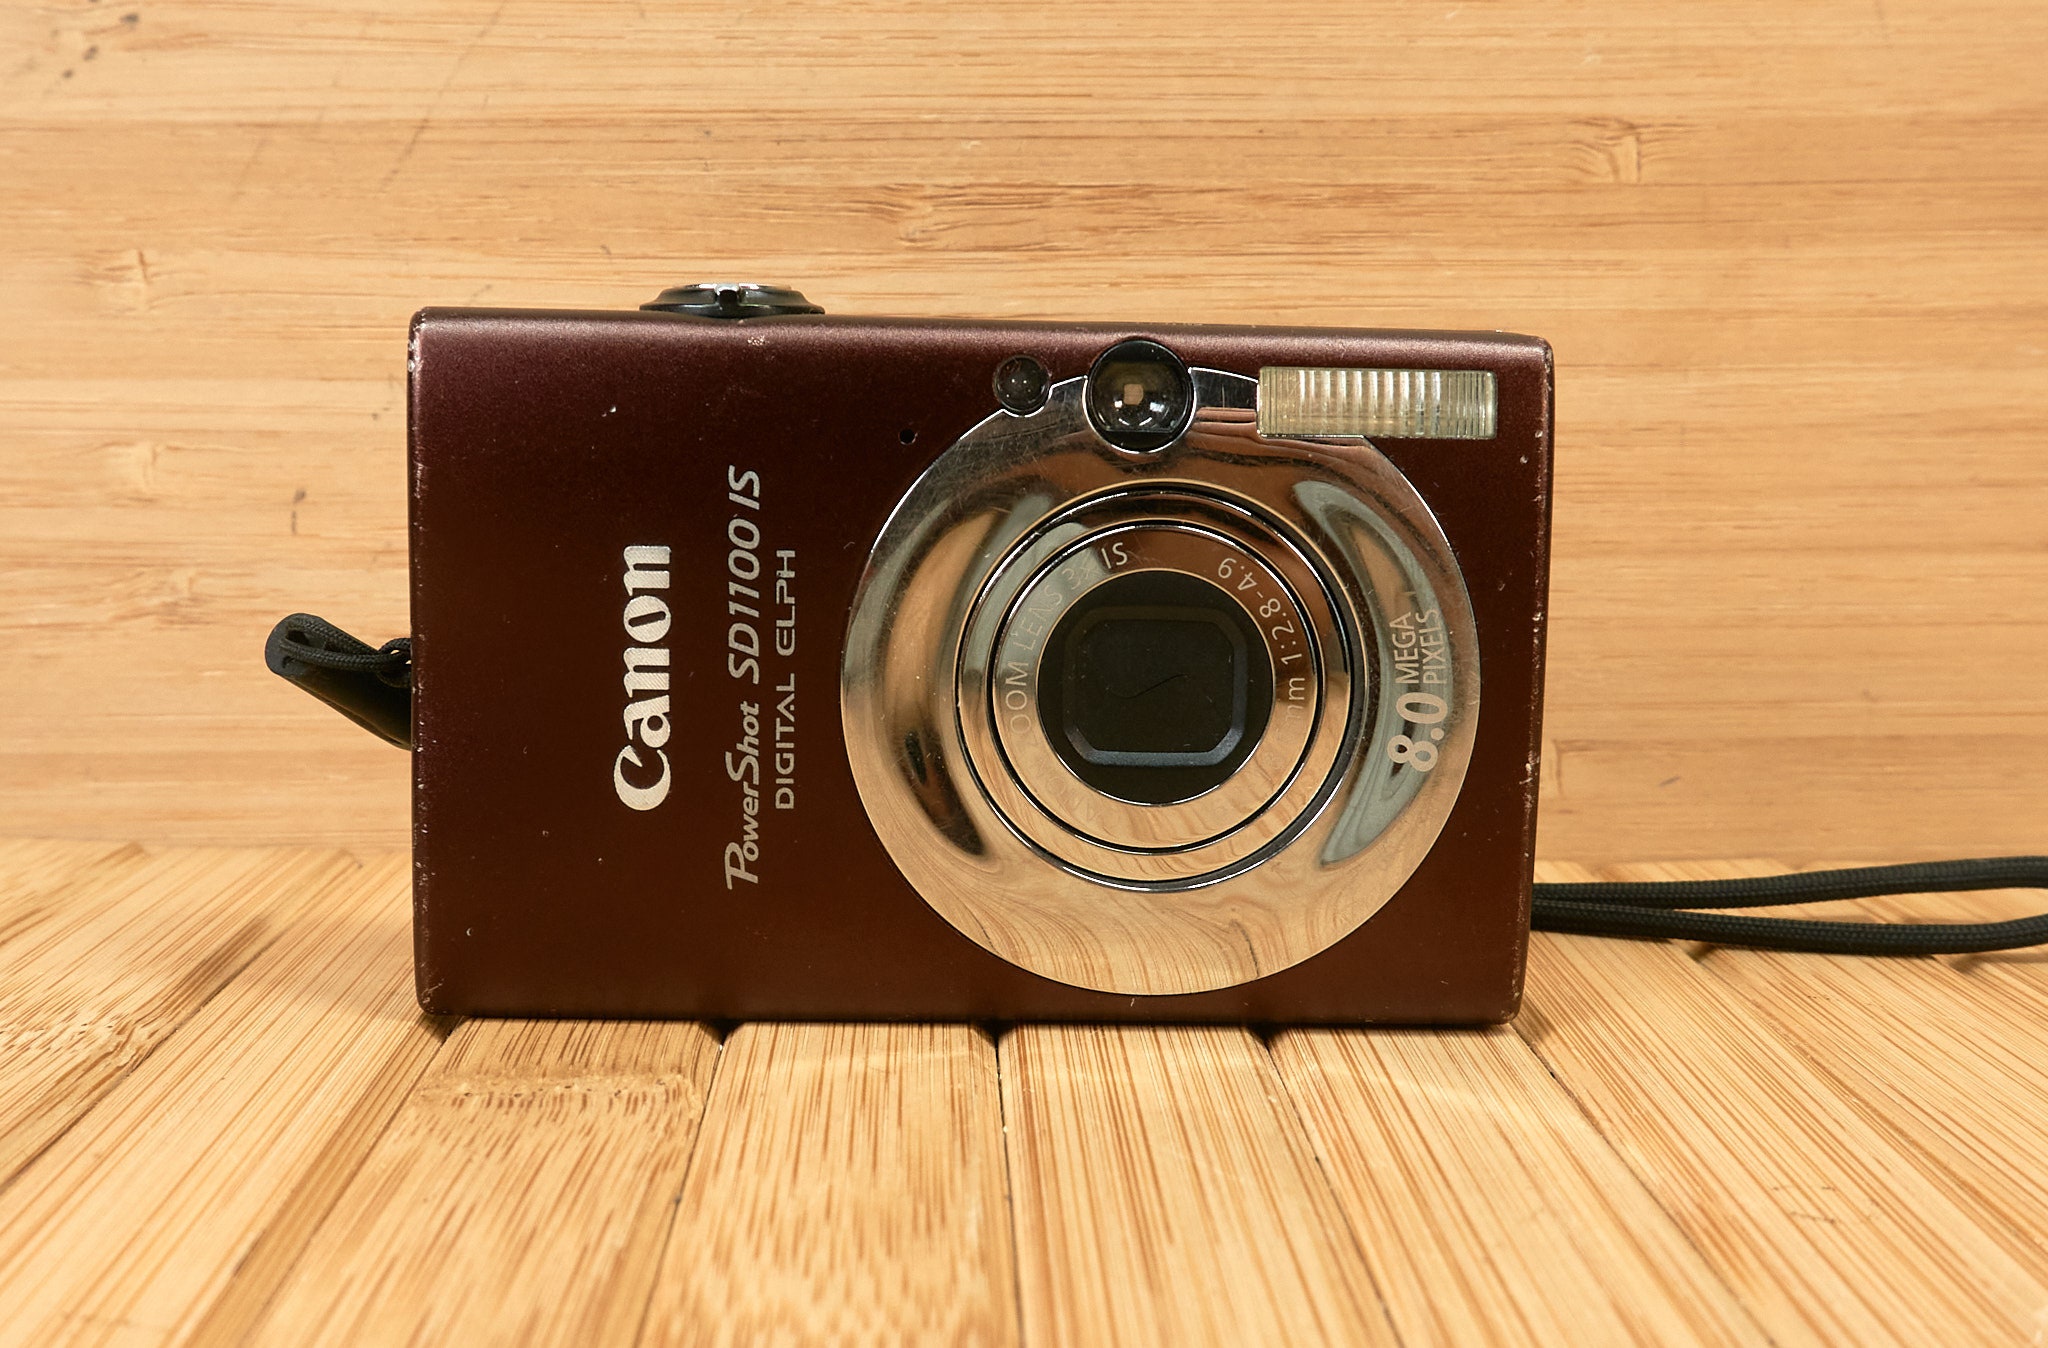 Canon Powershot SD1100IS 8MP Digital Elph Camera, 3x Optical Zoom, Image  Stabilized brown, Made in Japan -  UK